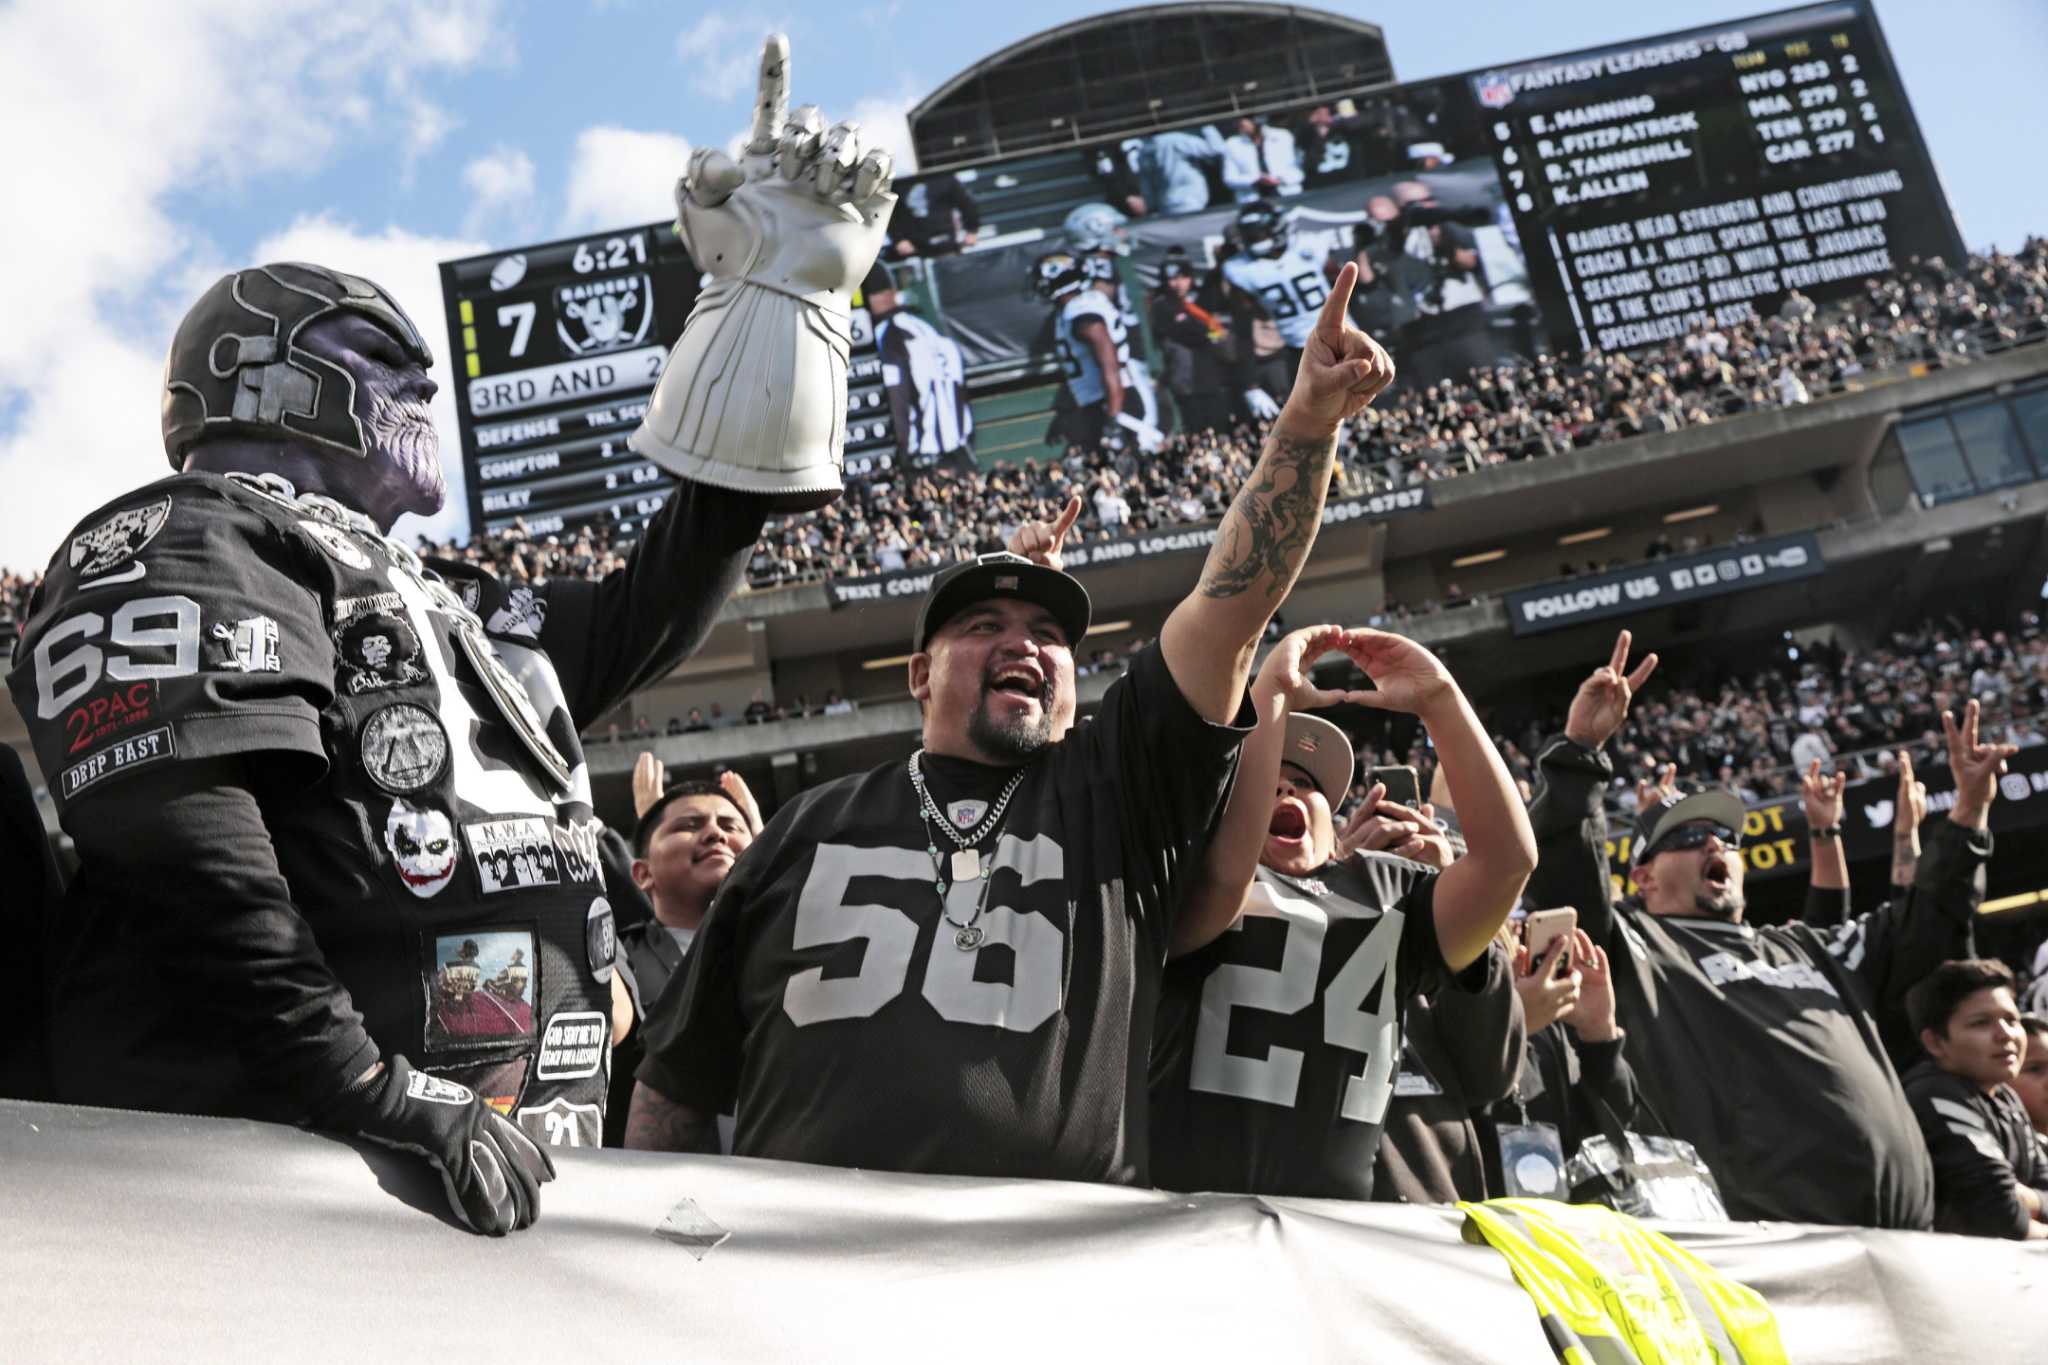 Federal appeals court rejects Oakland lawsuit over Raiders' departure